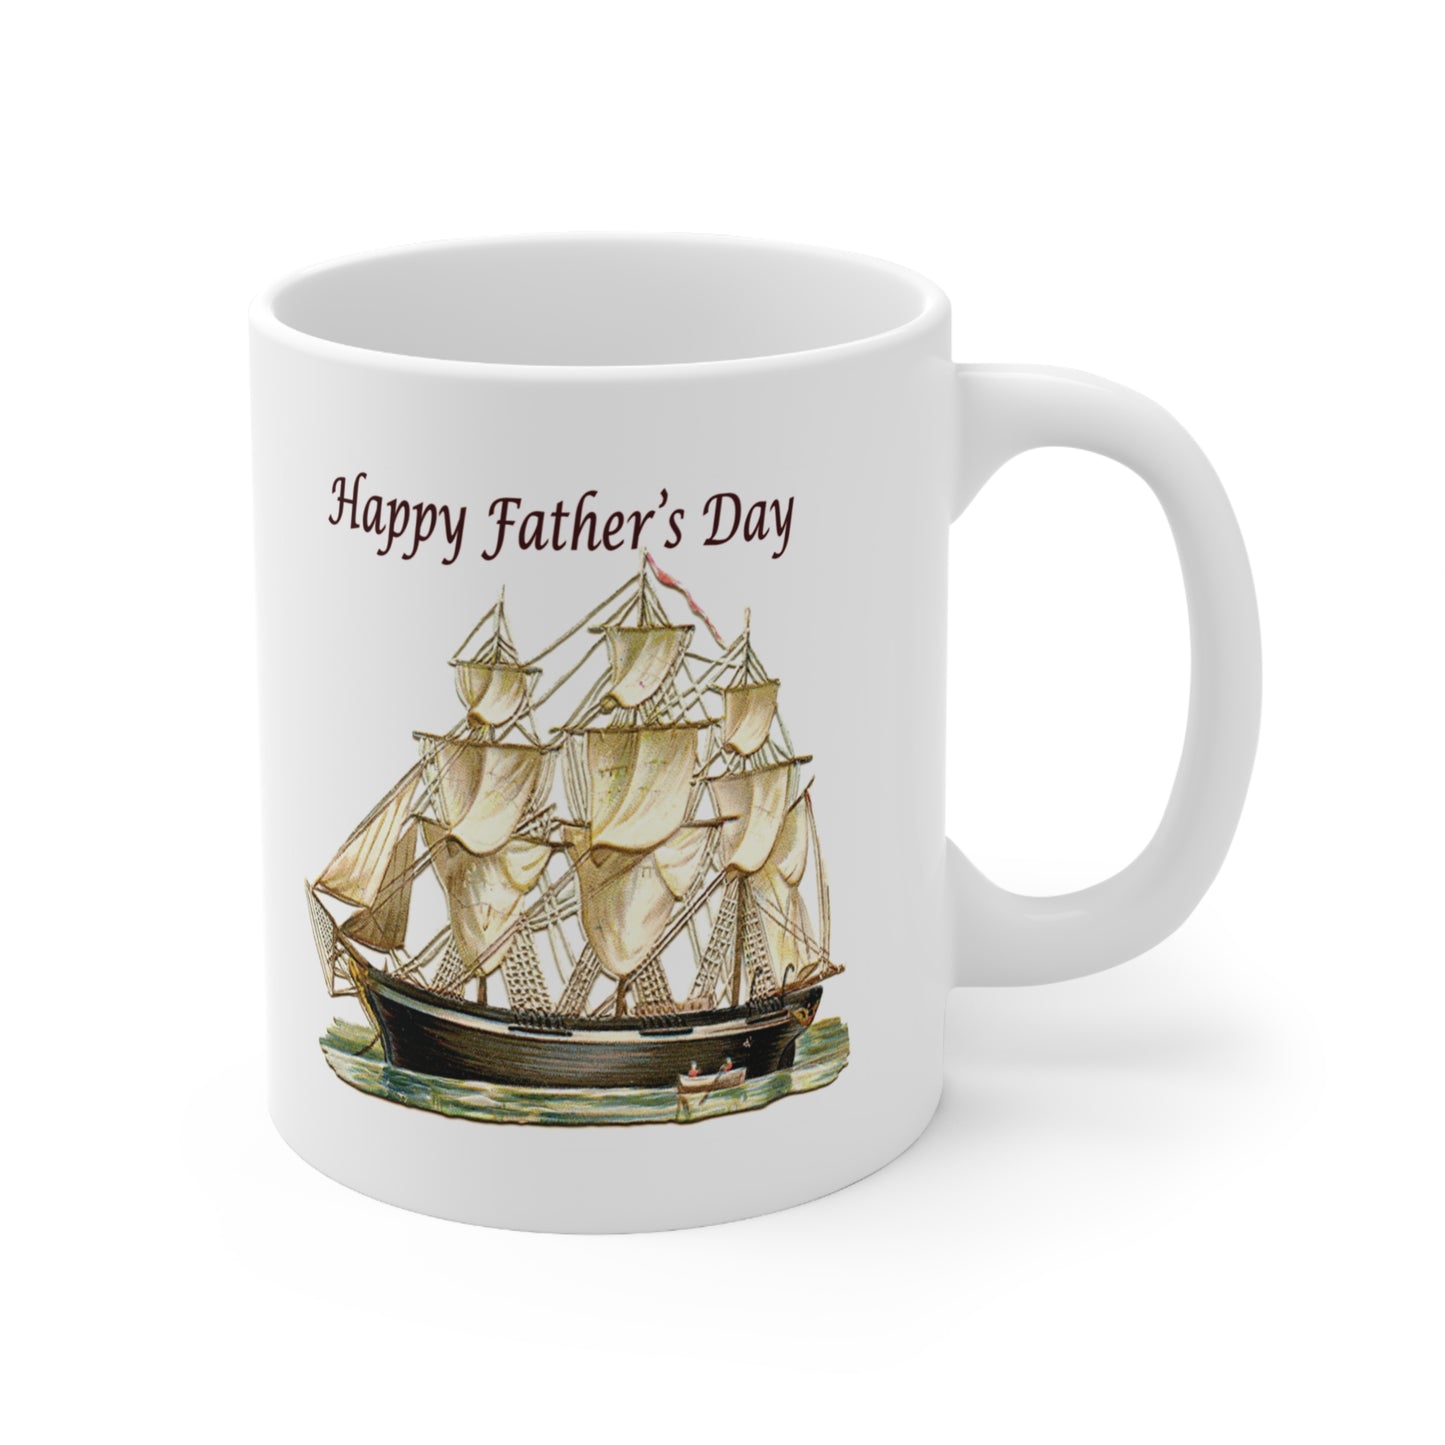 A white ceramic coffee mug with a design of a classic tall ship and the greeting Happy Father's day above it.